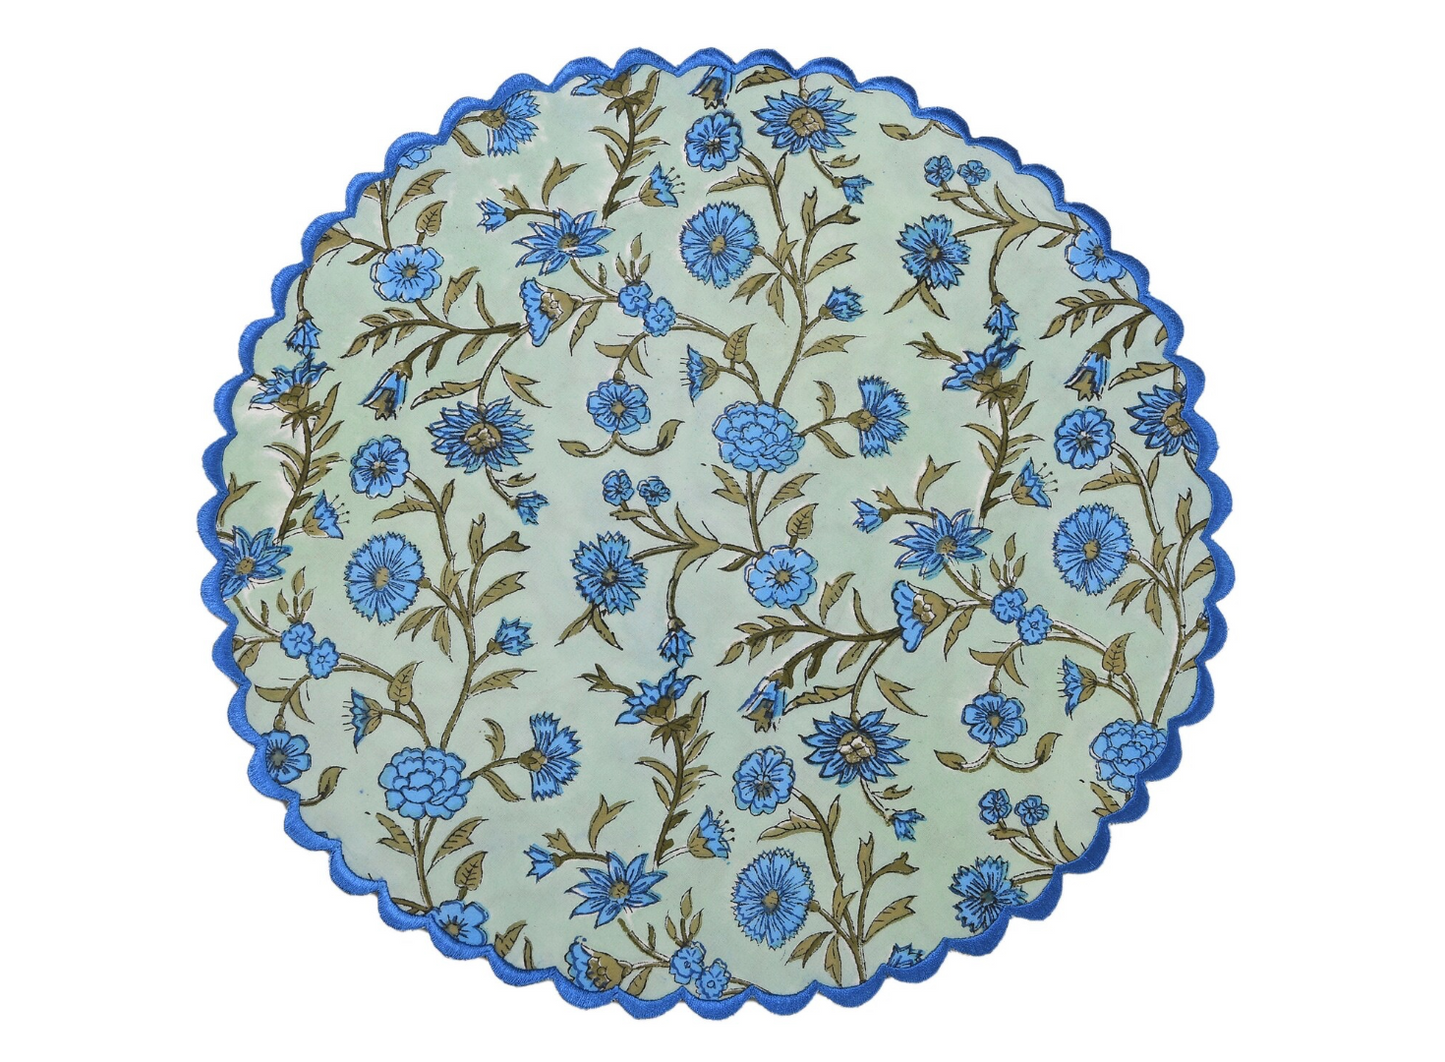 Set of 4 I Blue Floral on Green Round Scalloped Edge Embroidered Placemat I Table Mats I Cotton Placemat I Table Linen I Tablecloth - DharBazaar